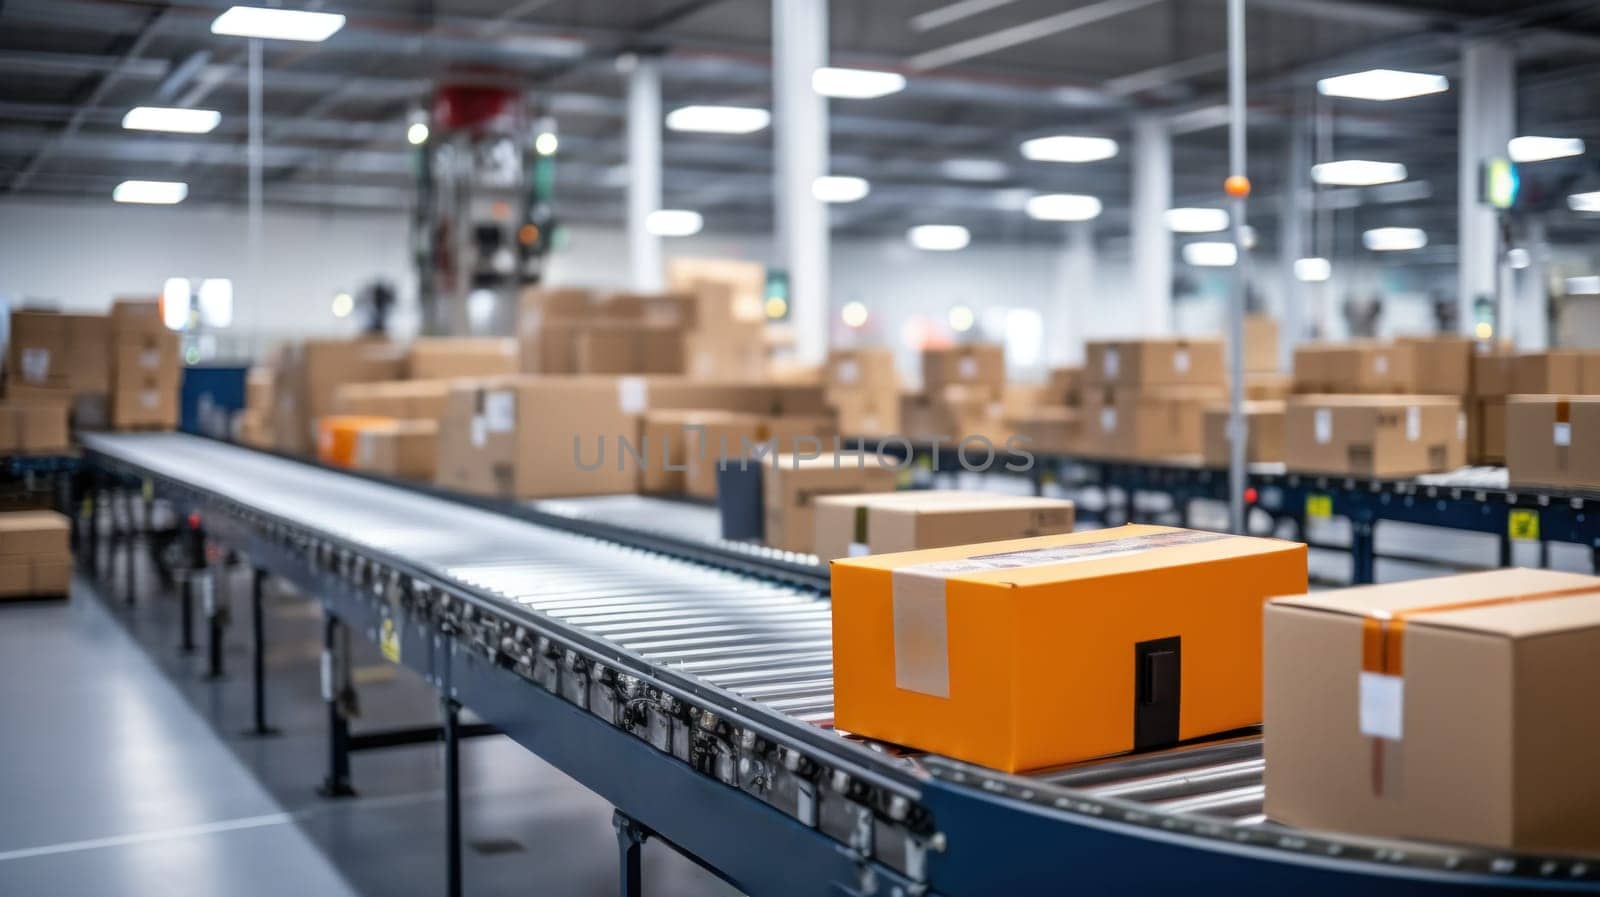 A conveyor belt with boxes on it in a warehouse, AI by starush